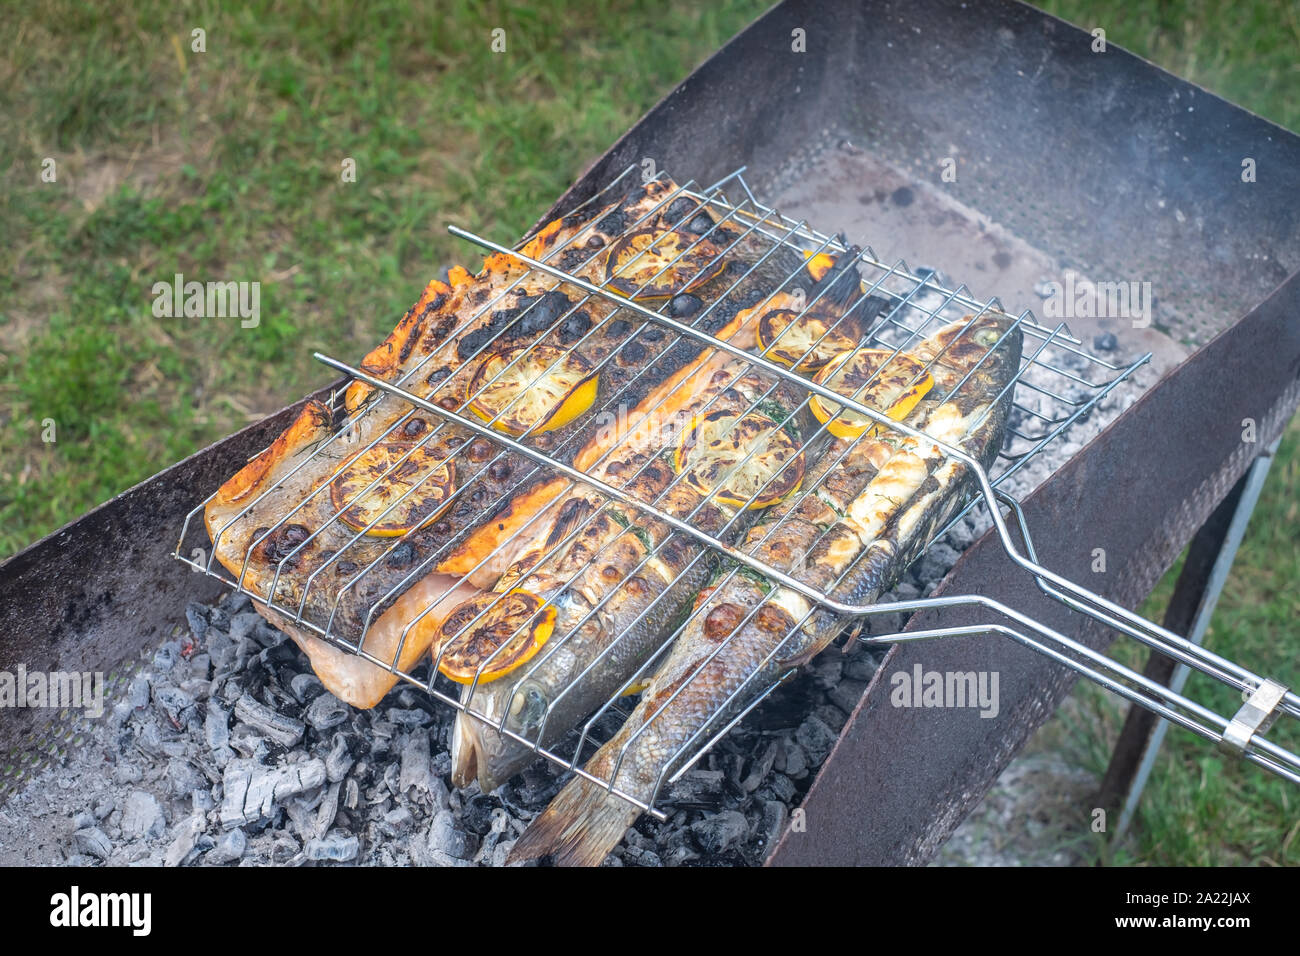 Barbecue outdoors with grilled salmon and gilt-head bream Stock Photo